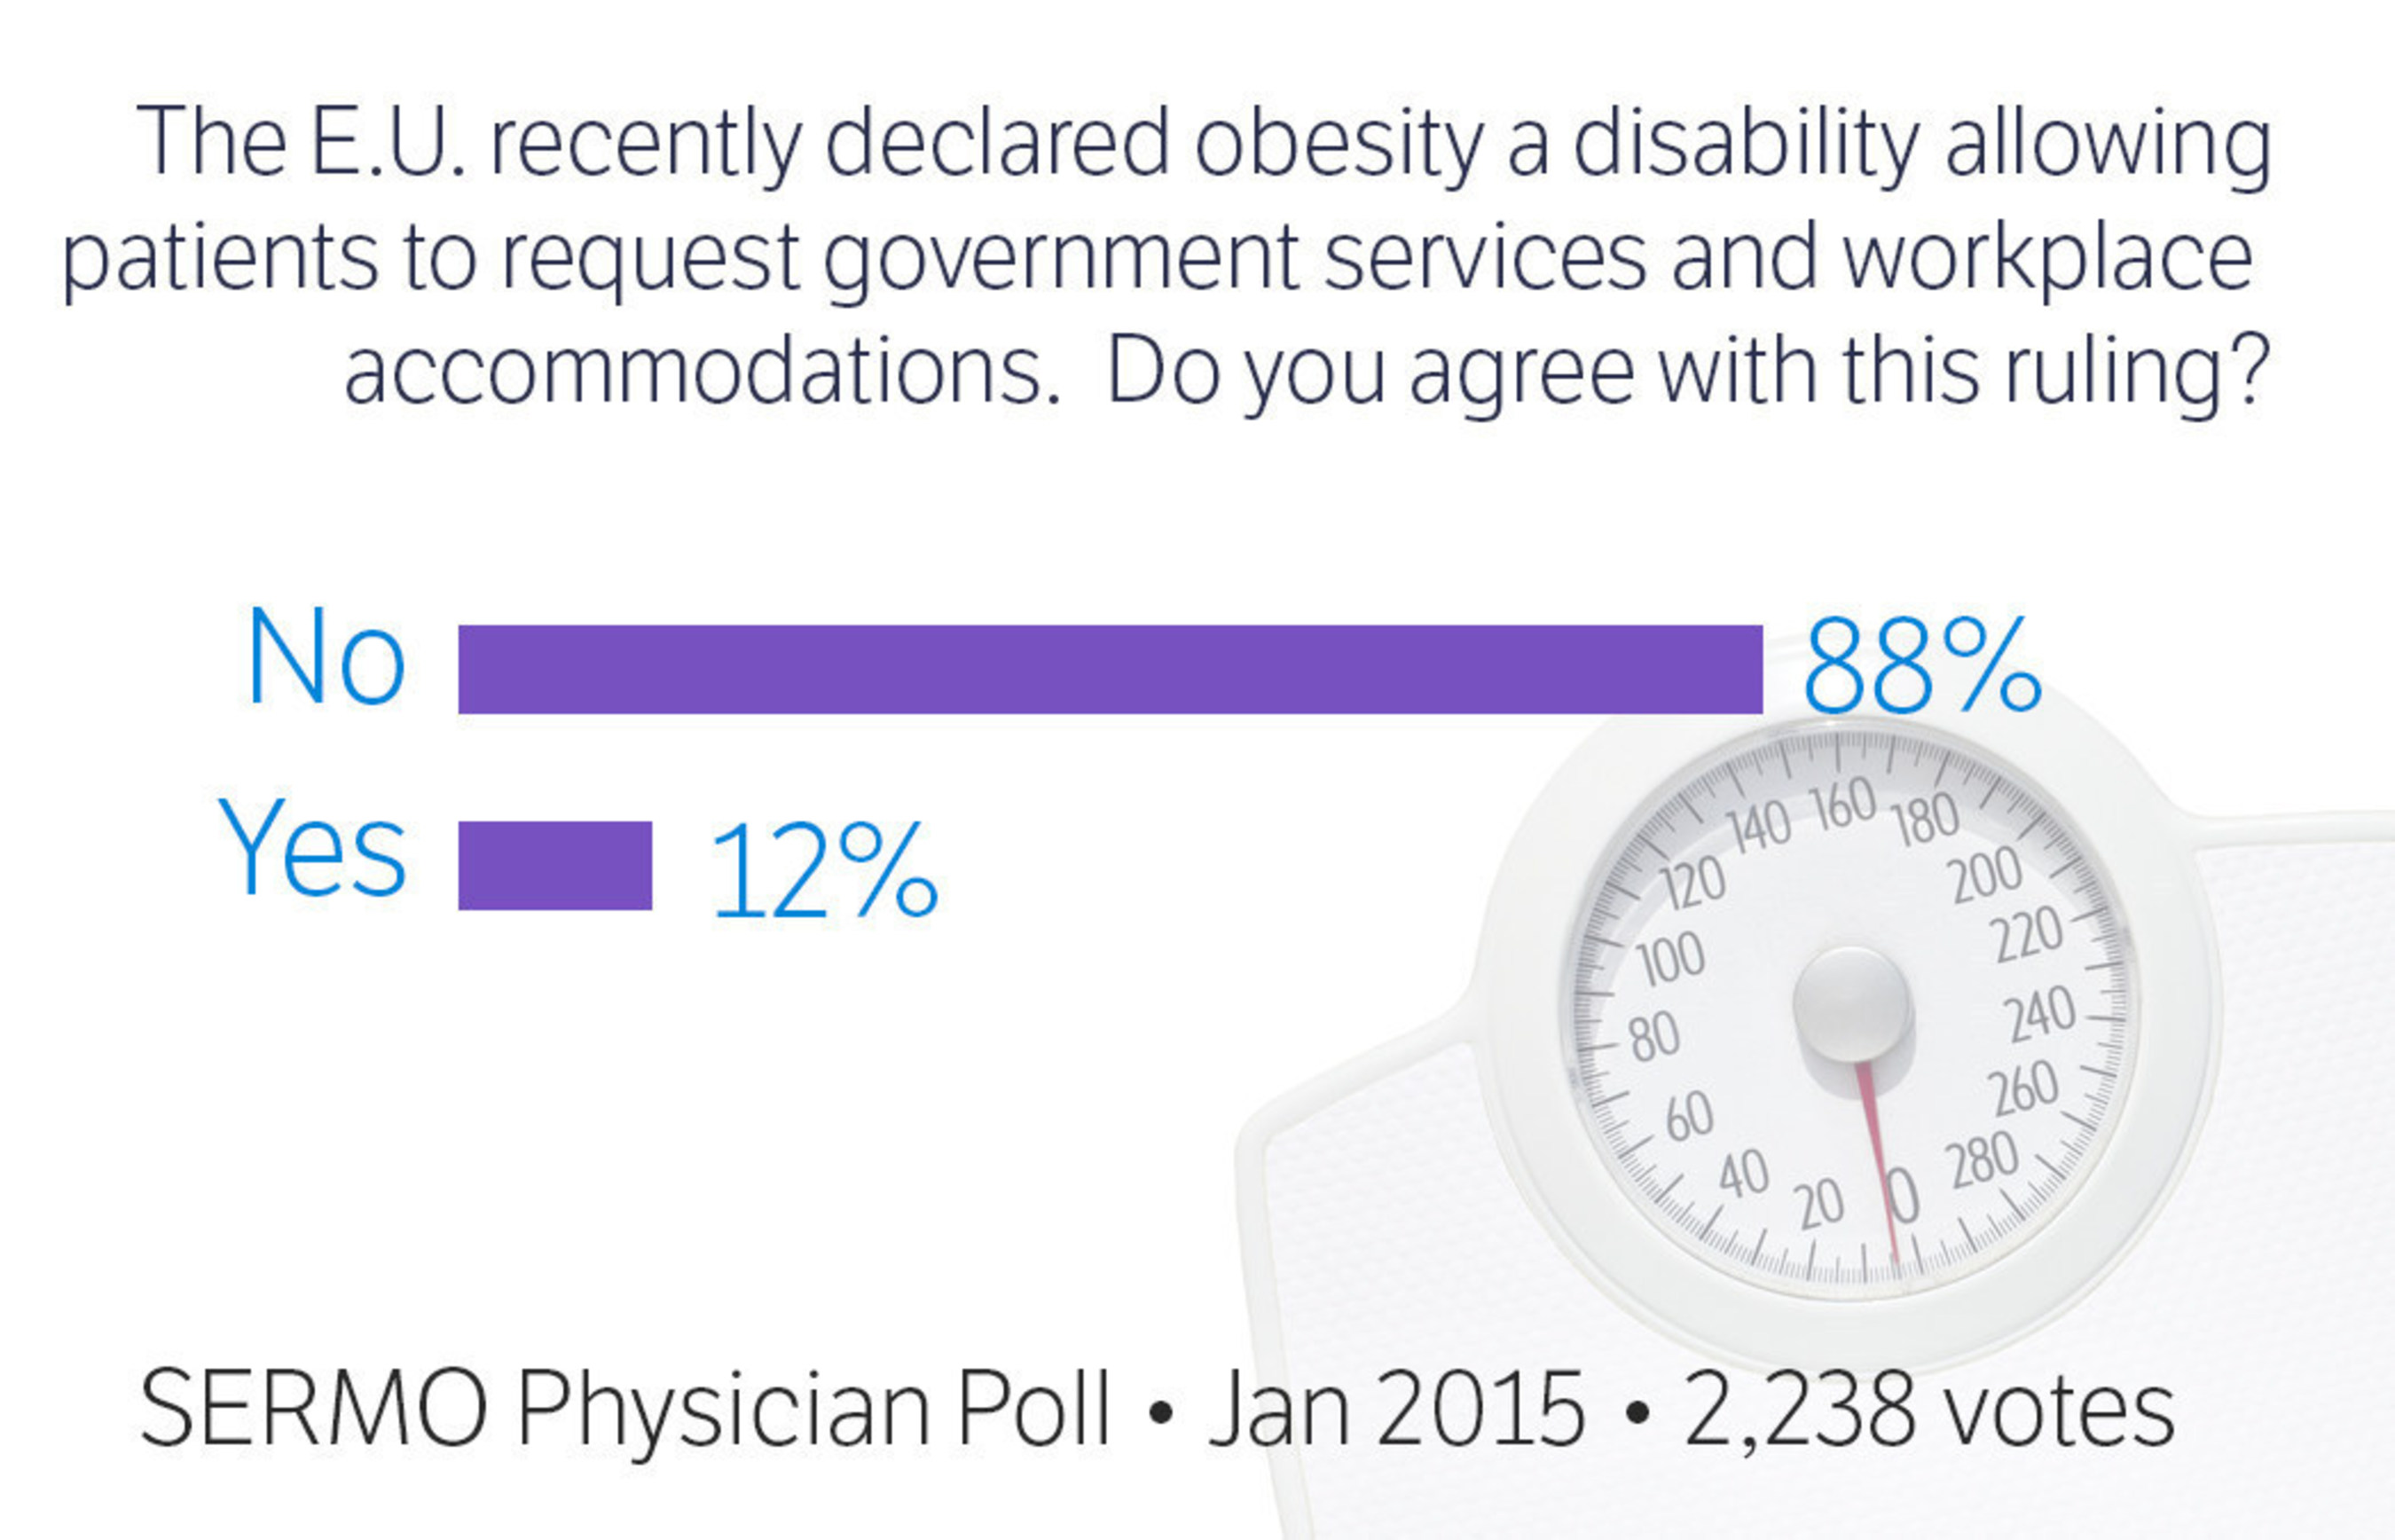 SERMO Physician Poll on E.U. obesity as a disability ruling - January 2015